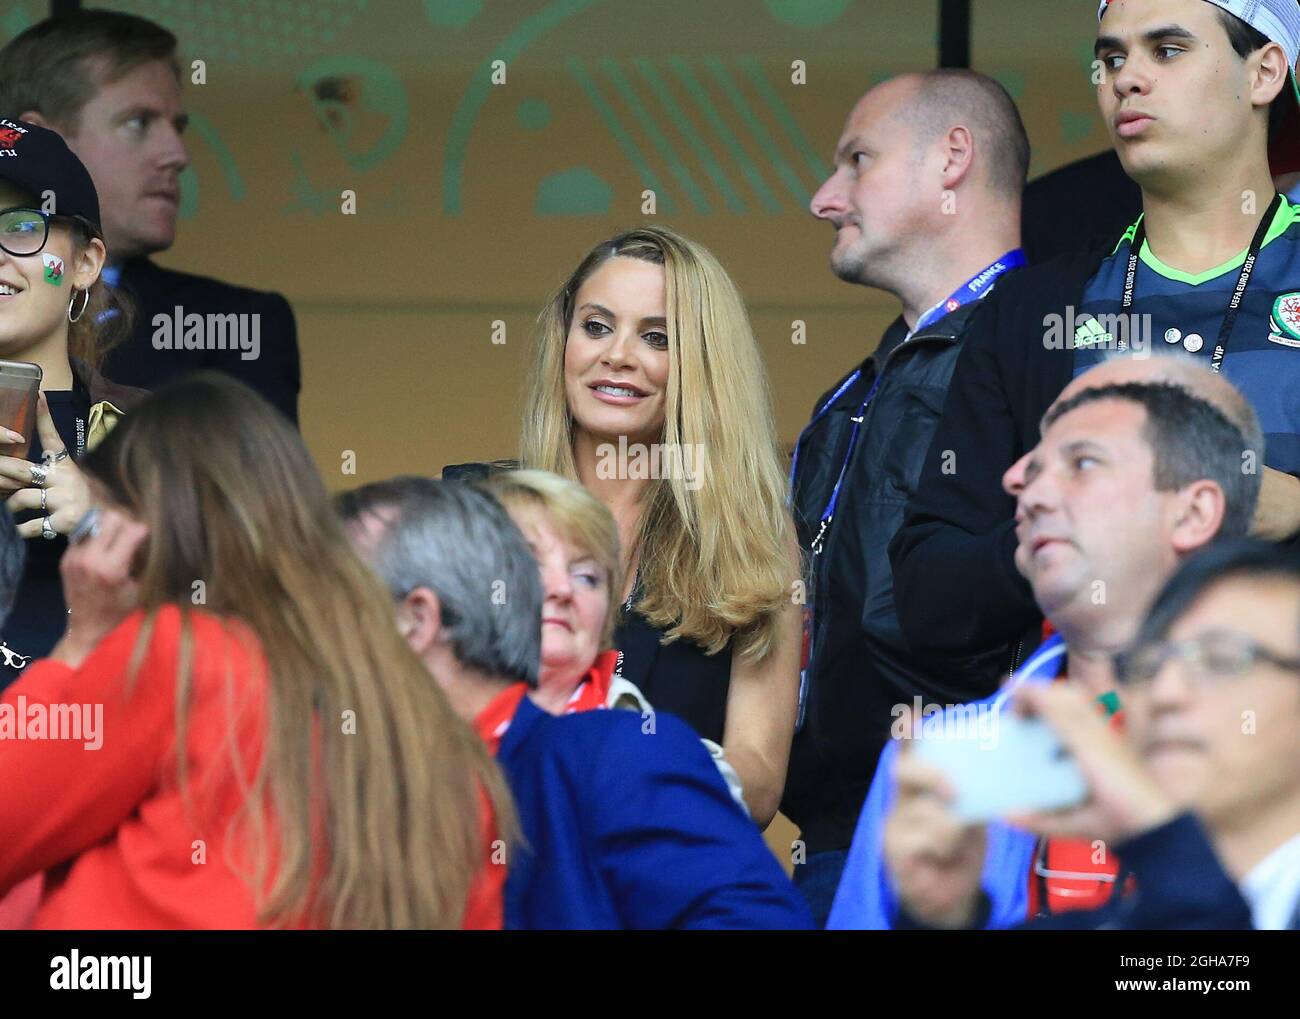 Charlotte Jackson the partner of Chris Coleman during the UEFA European Championship 2016 match at the Stadium Pierre Mauroy, Lille. Picture date July 01, 2016 Pic David Klein/Sportimage via PA Images Stock Photo